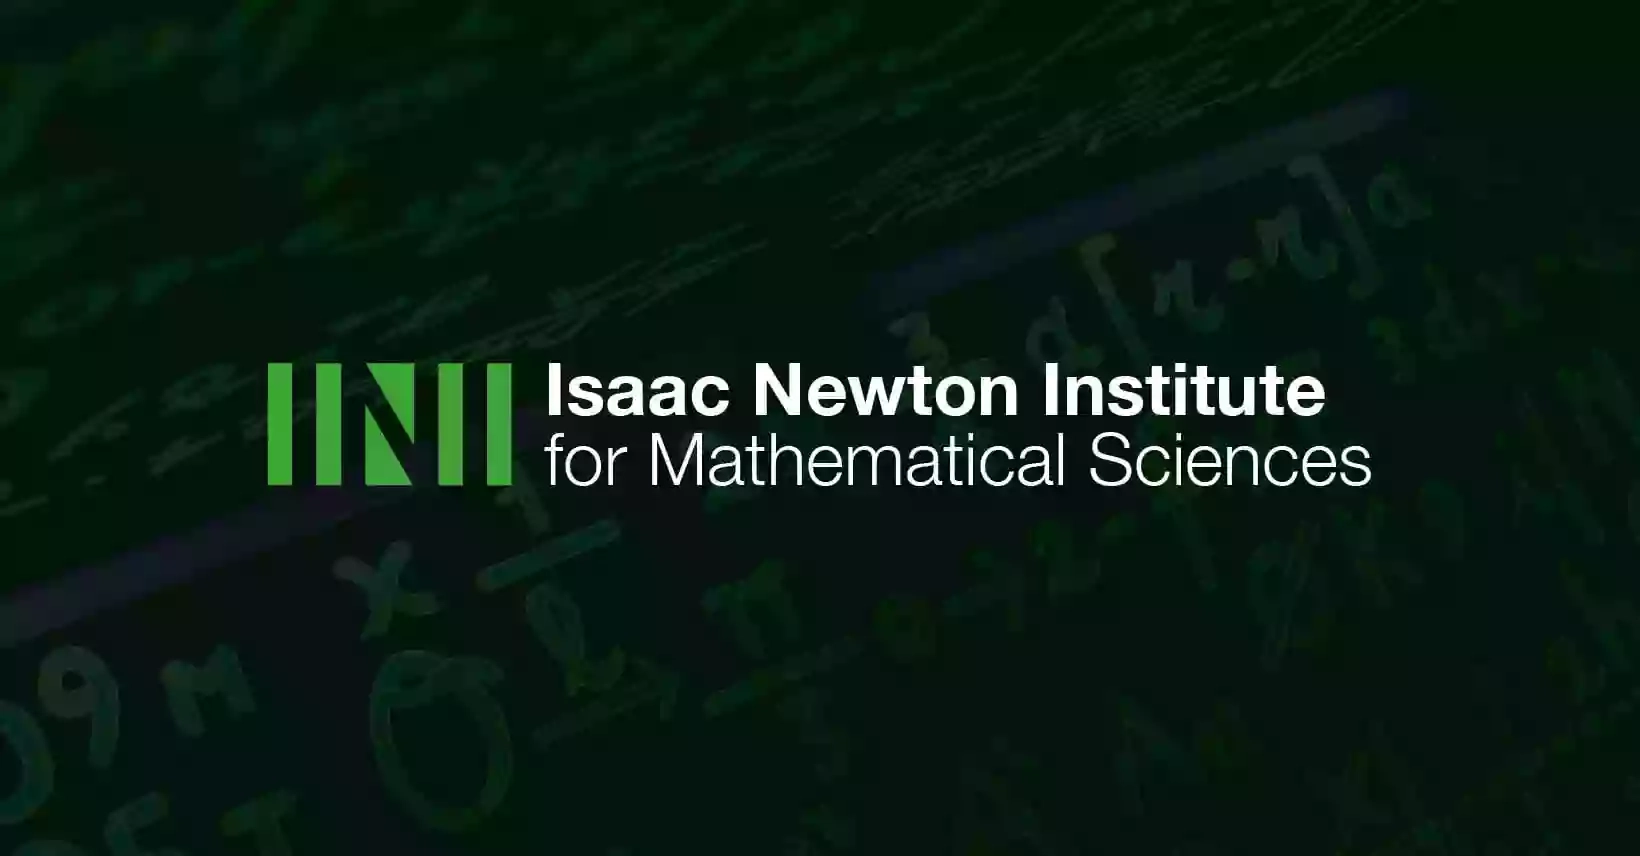 Isaac Newton Institute for Mathematical Sciences